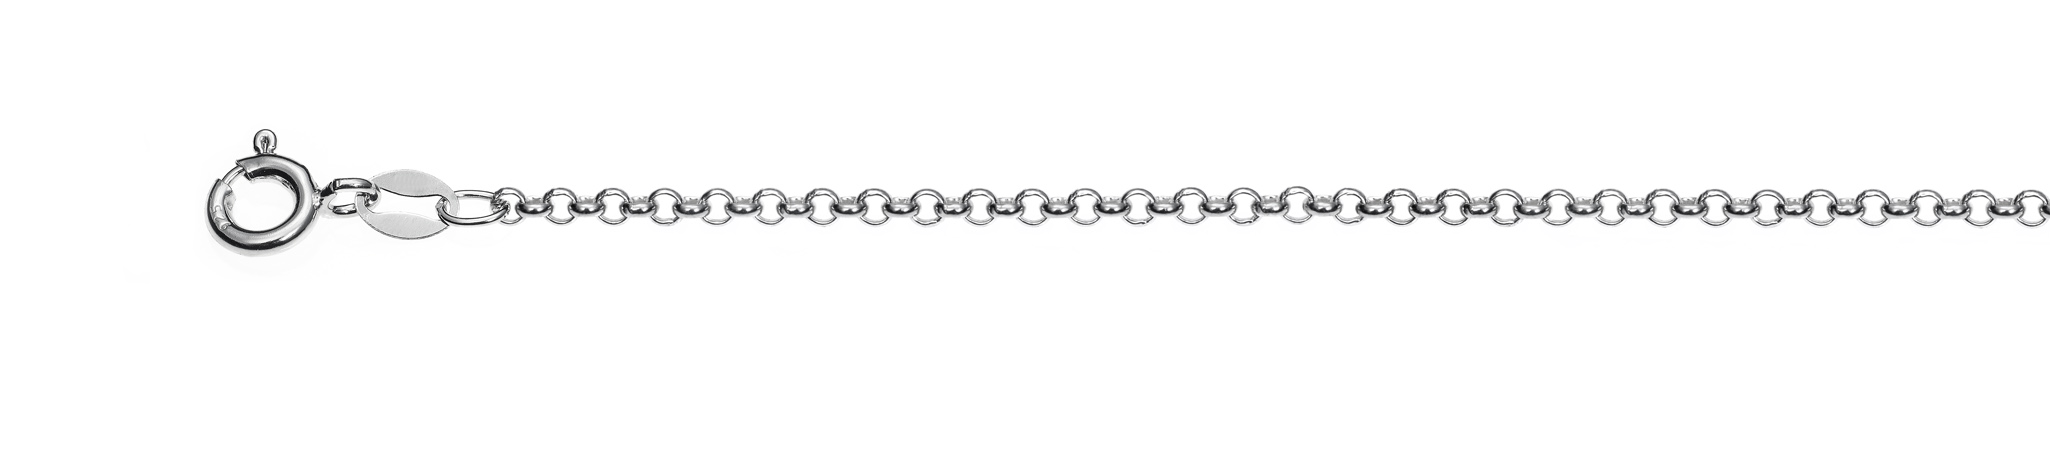 Ref.: 94026 - Rolo 0.26 rhodium plated - Wide 1.5